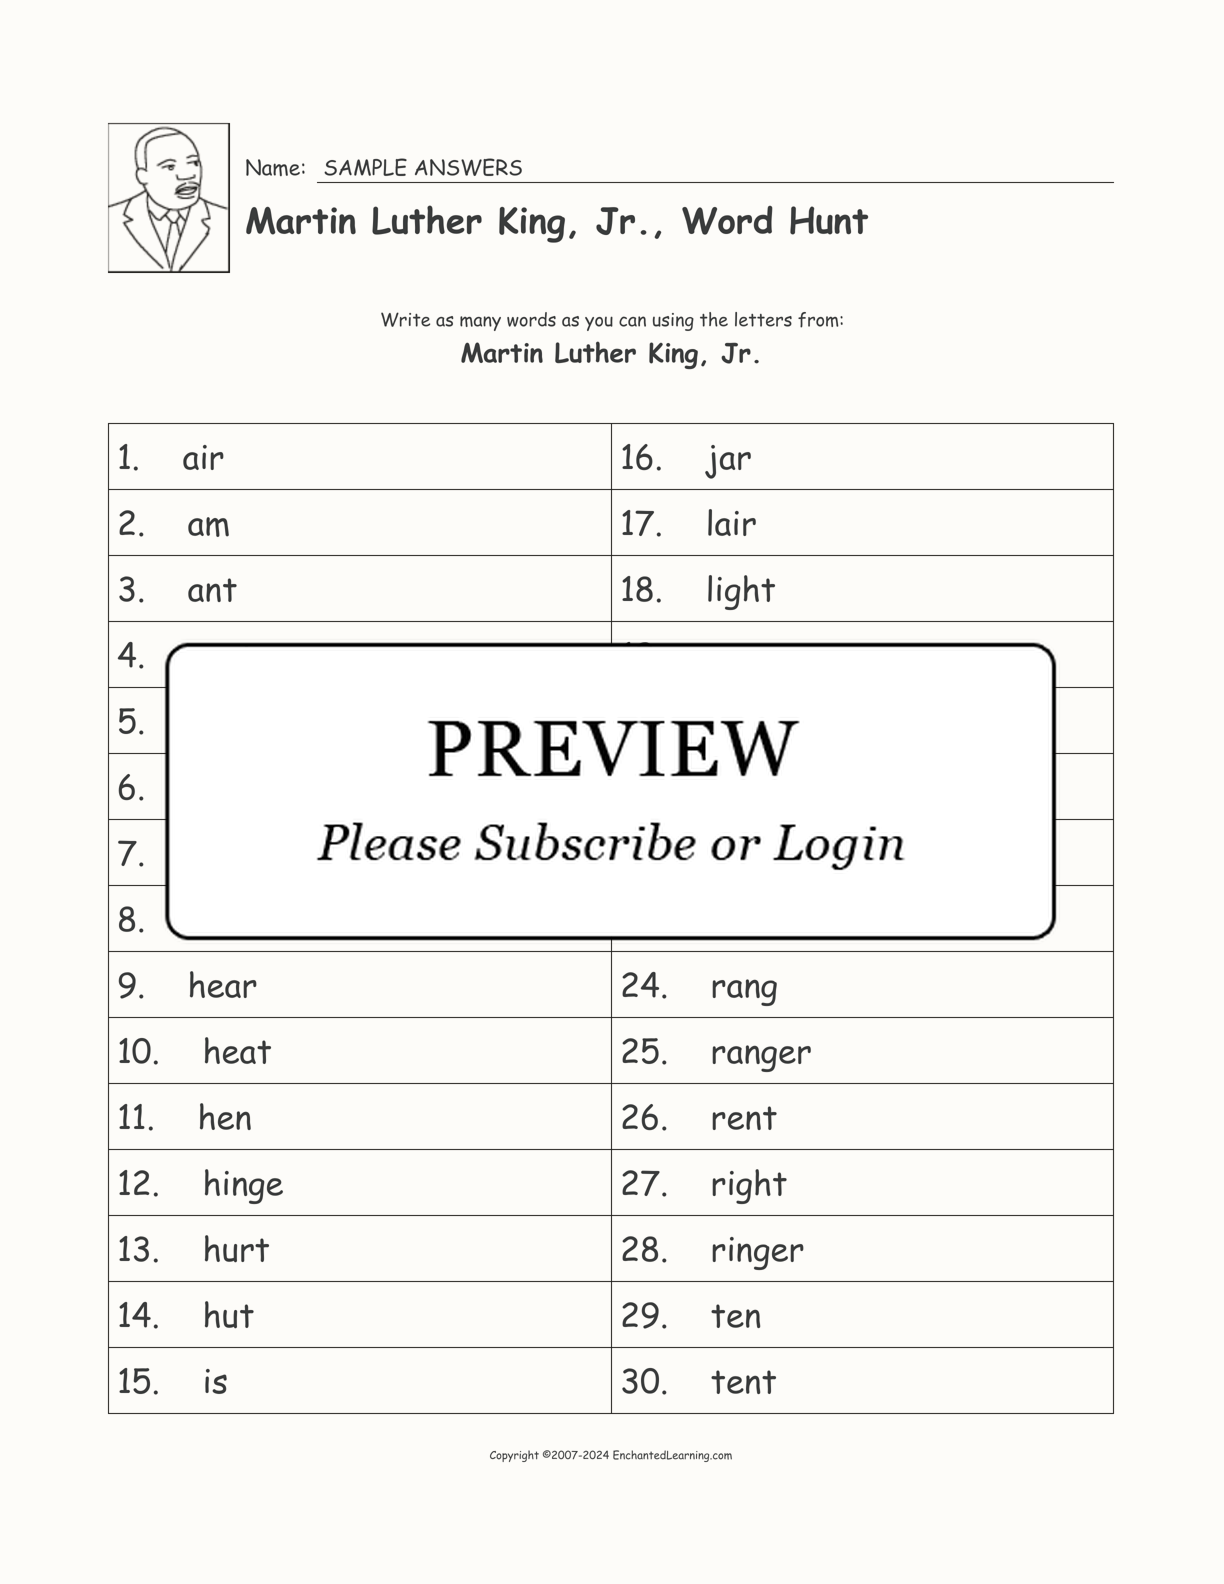 Martin Luther King, Jr., Word Hunt interactive worksheet page 2